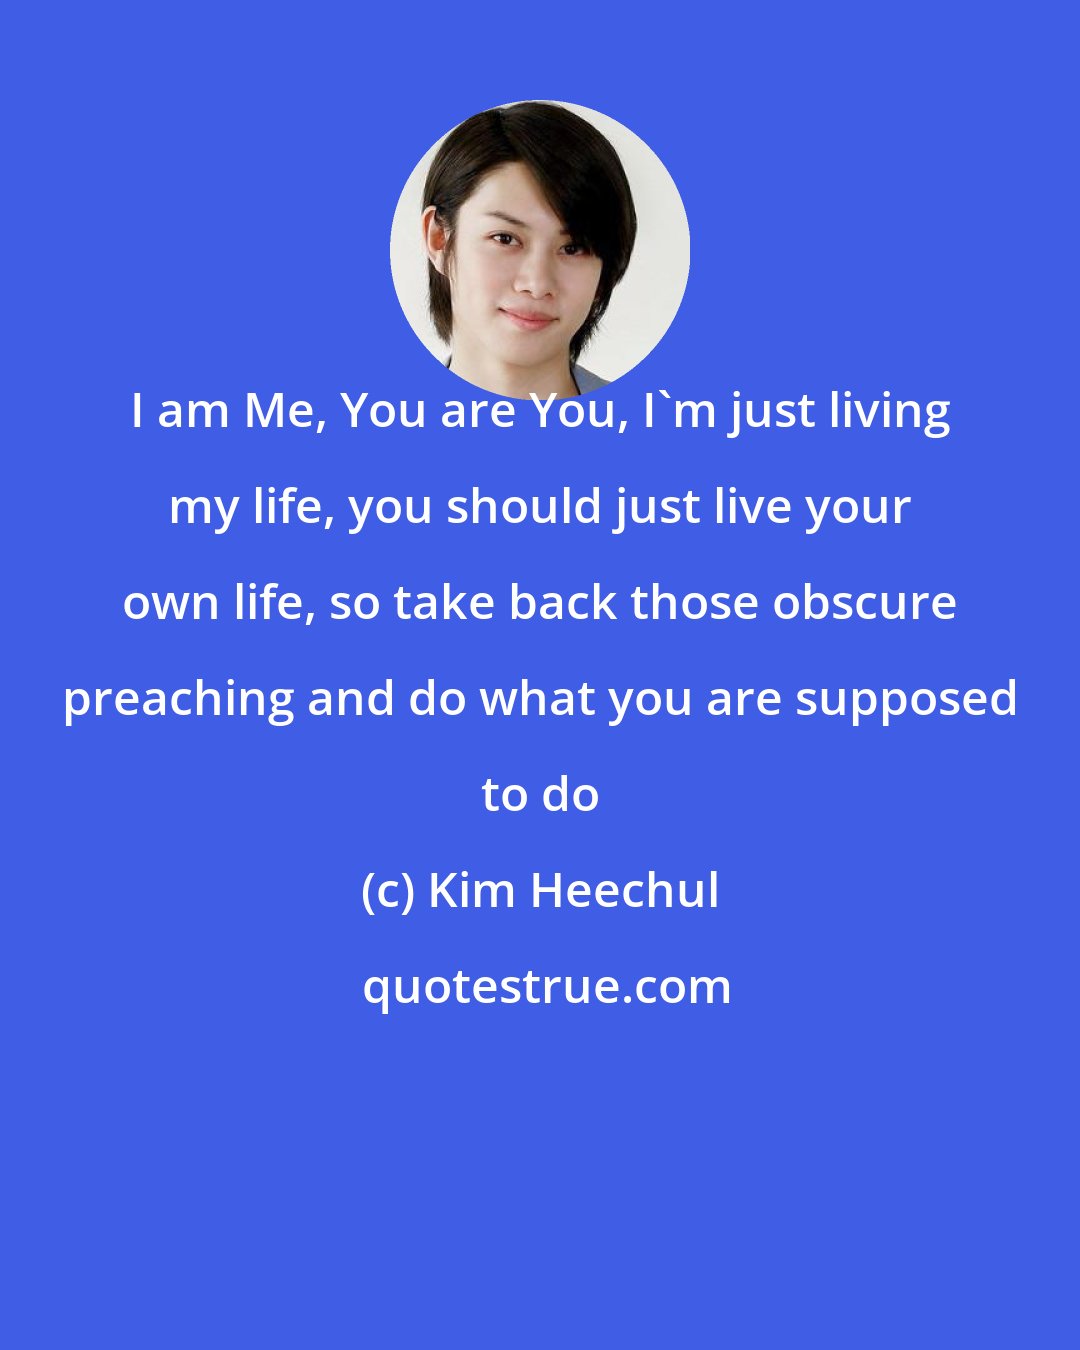 Kim Heechul: I am Me, You are You, I'm just living my life, you should just live your own life, so take back those obscure preaching and do what you are supposed to do